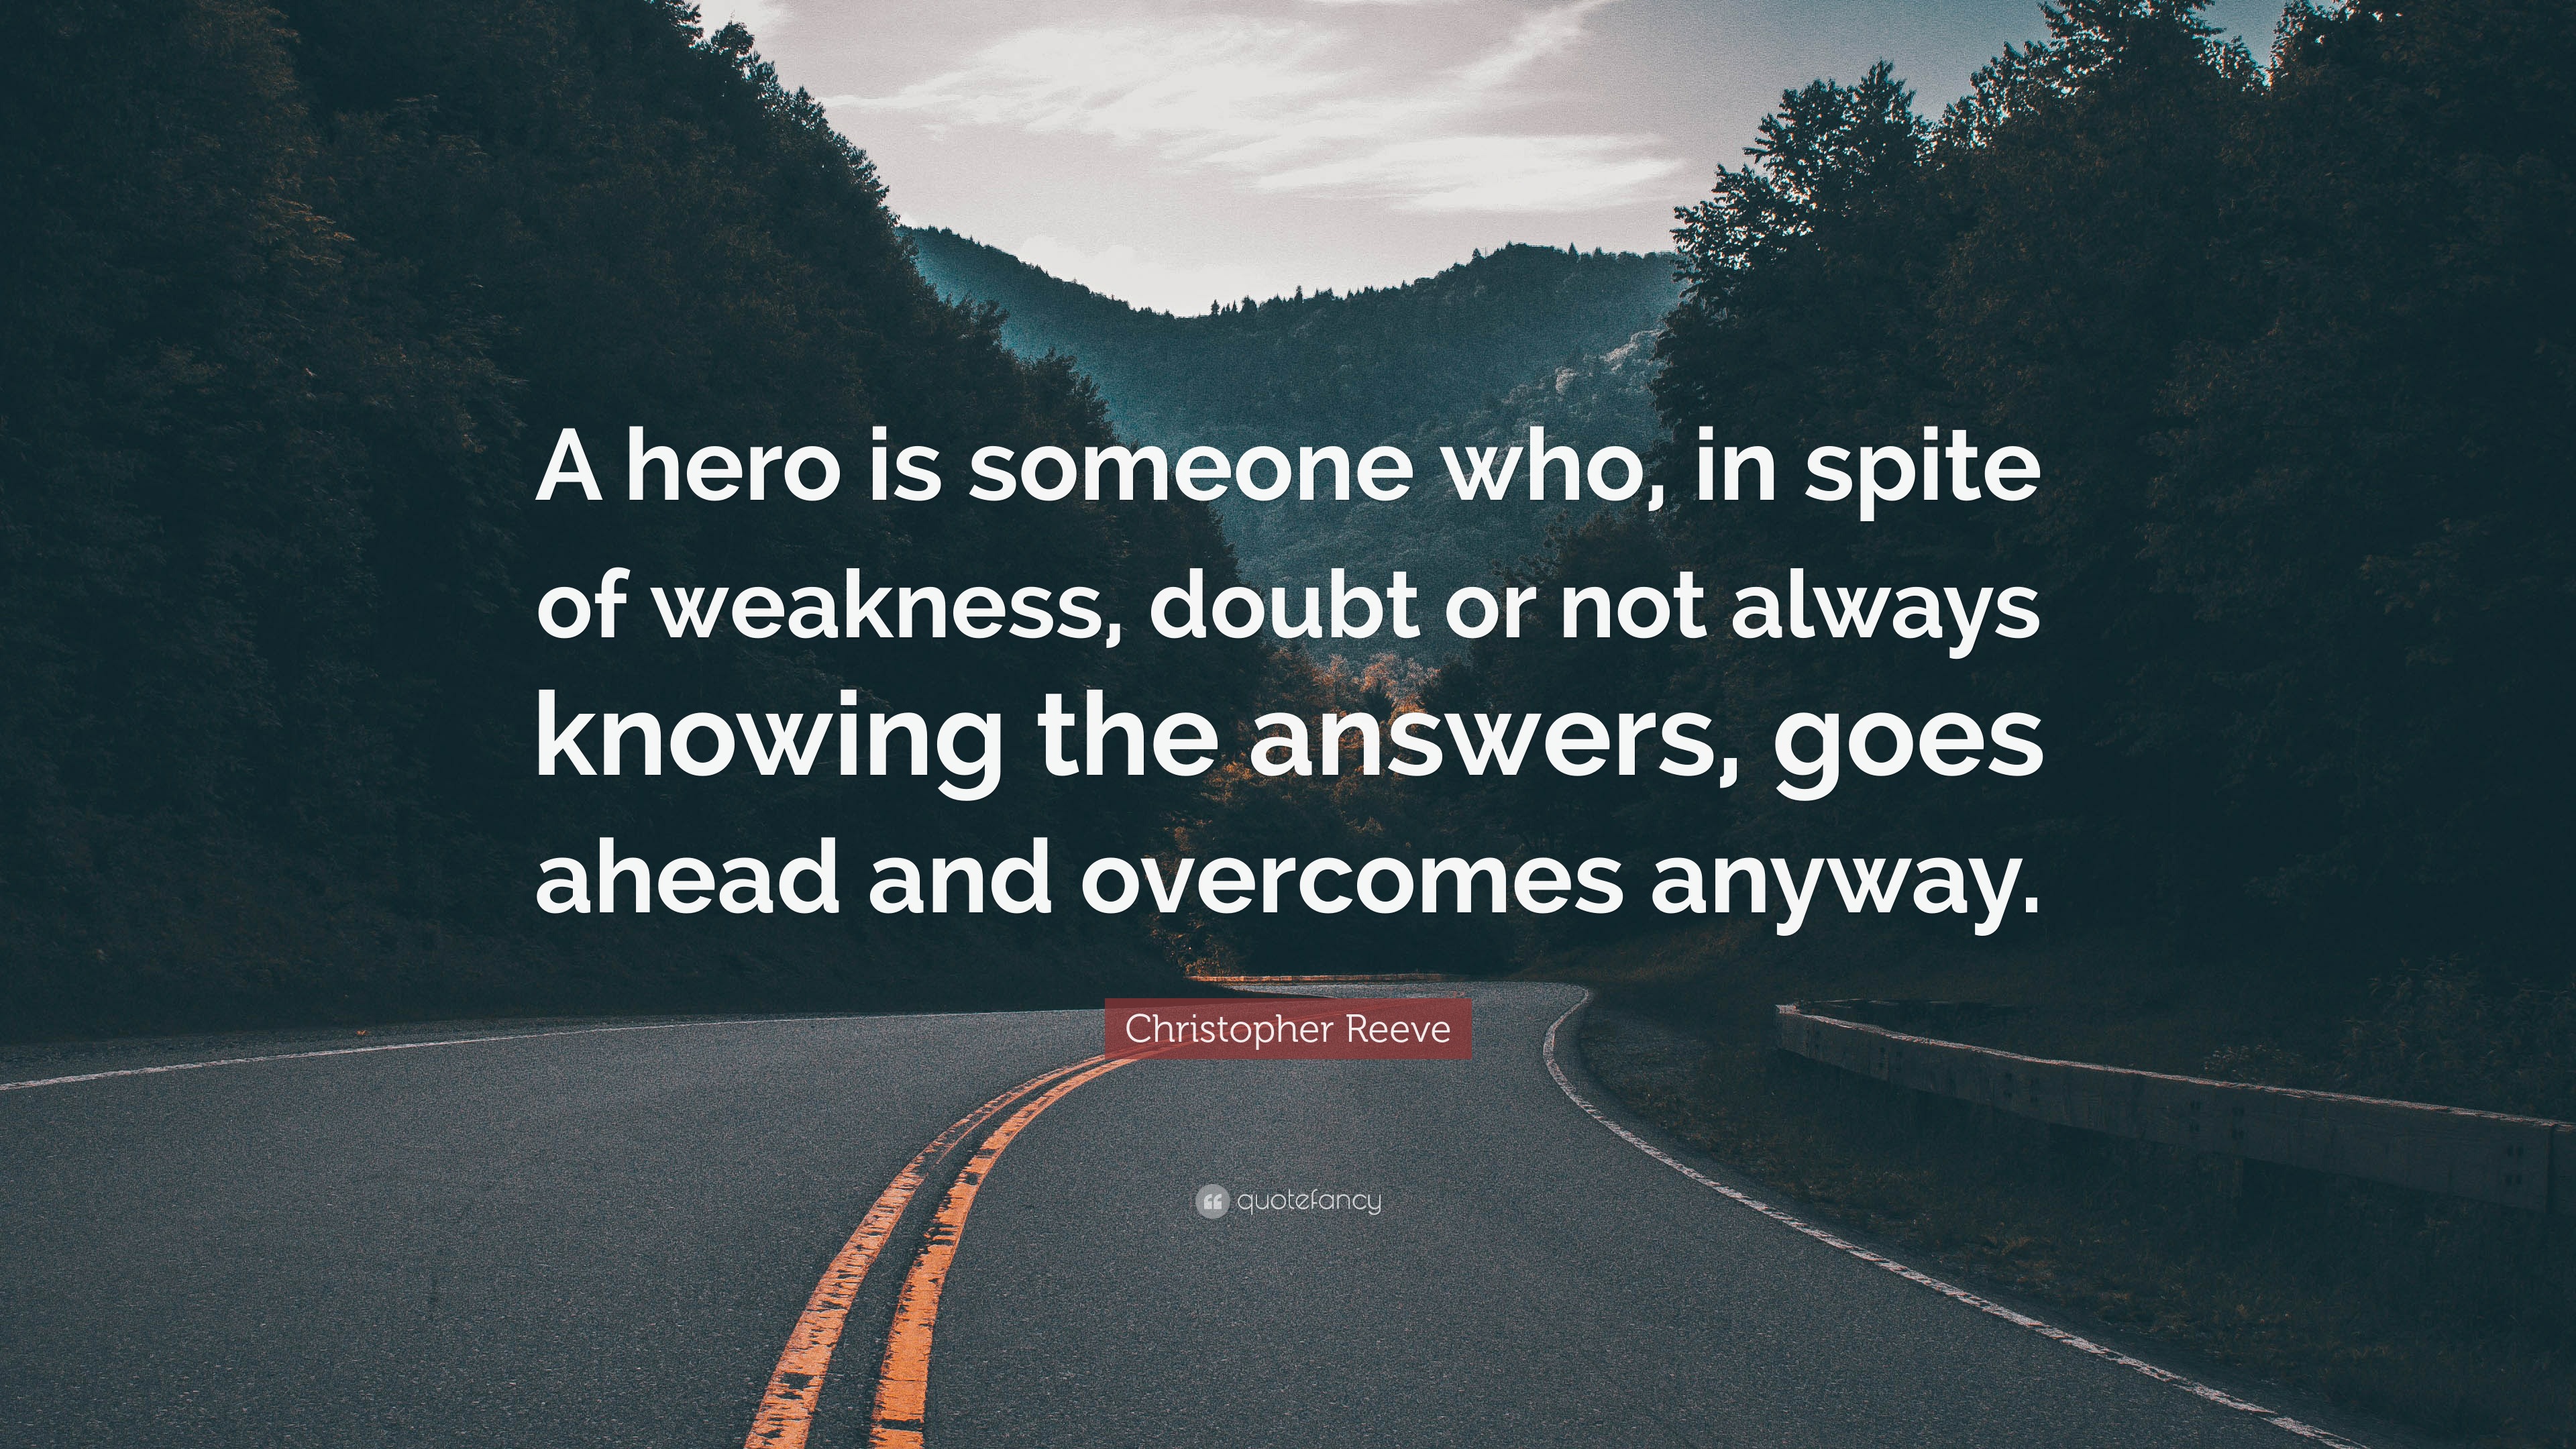 Christopher Reeve Quote: “A hero is someone who, in spite of weakness ...